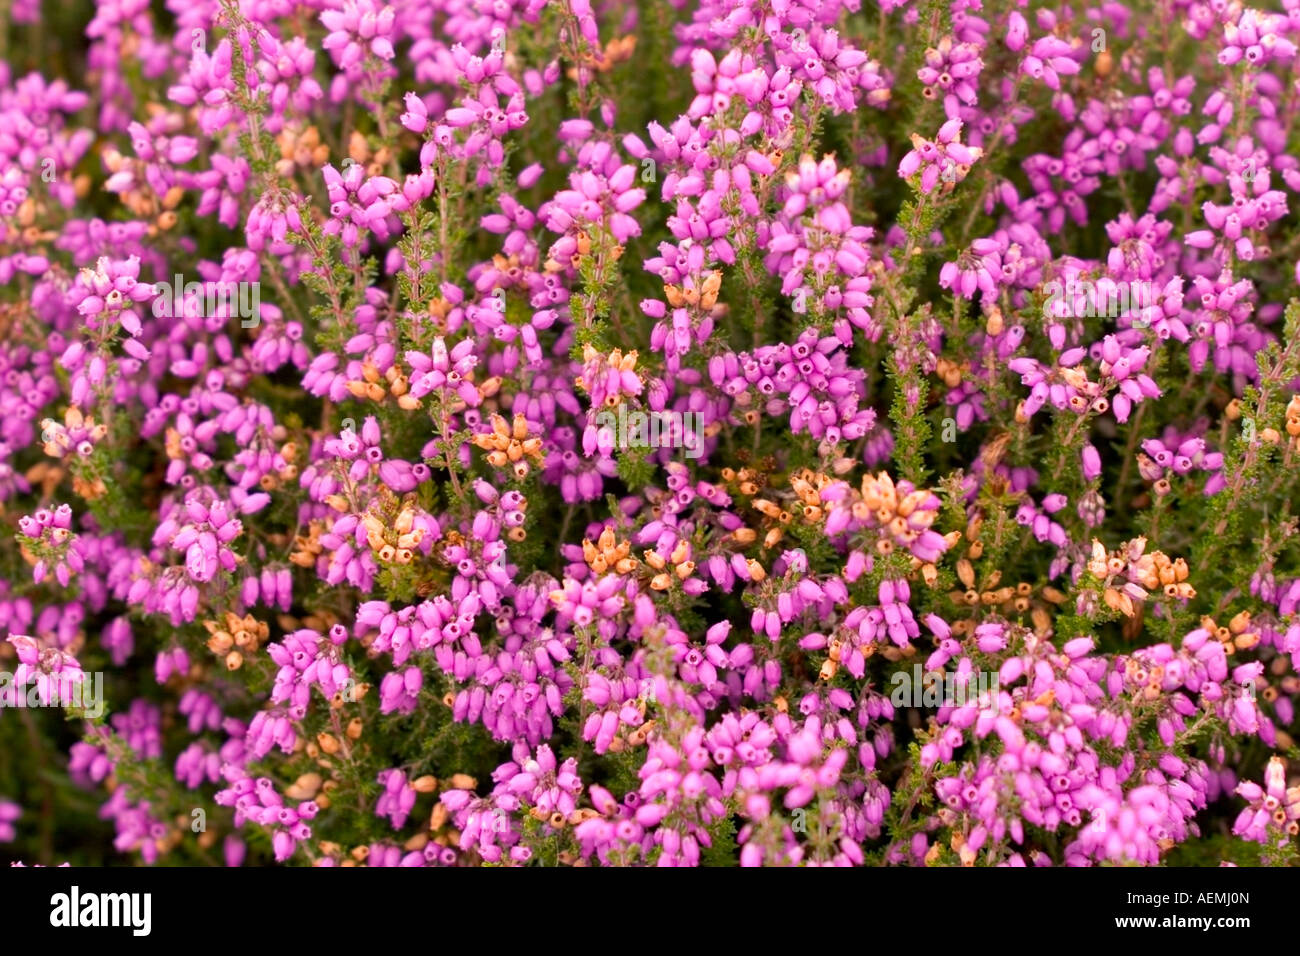 Close up view of Scottish wild Bell heather Scotland August 2007 Stock Photo